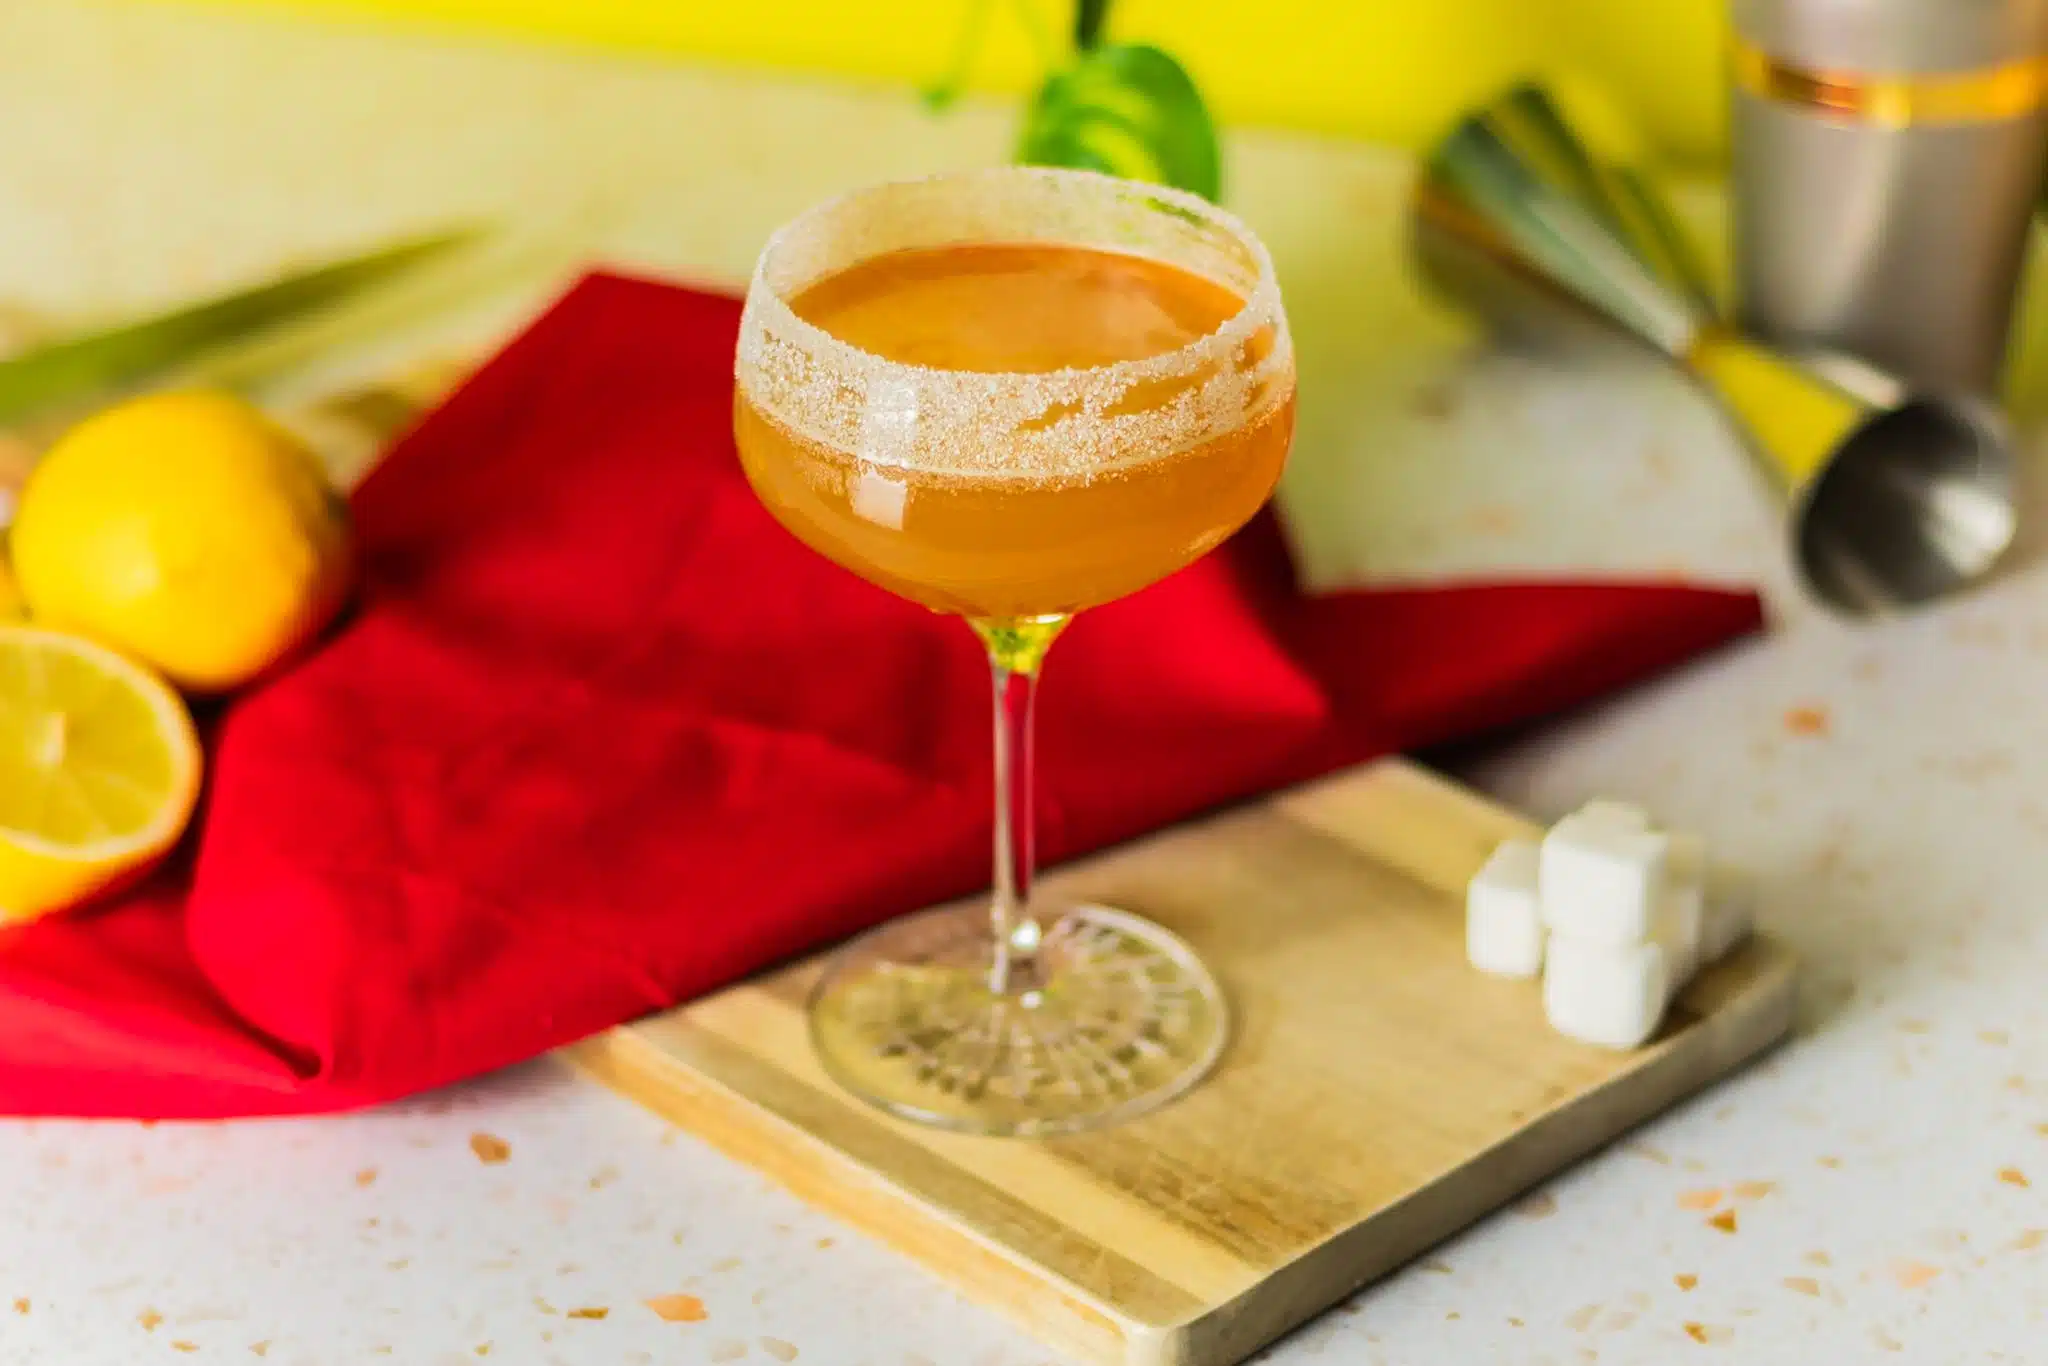 A side shot of a Sidecar cocktail in a cocktail glass on a wooden board placed on a white marmol table with a red cloth, four sugar cubes, two lemons, a jigger, and a shaker around.